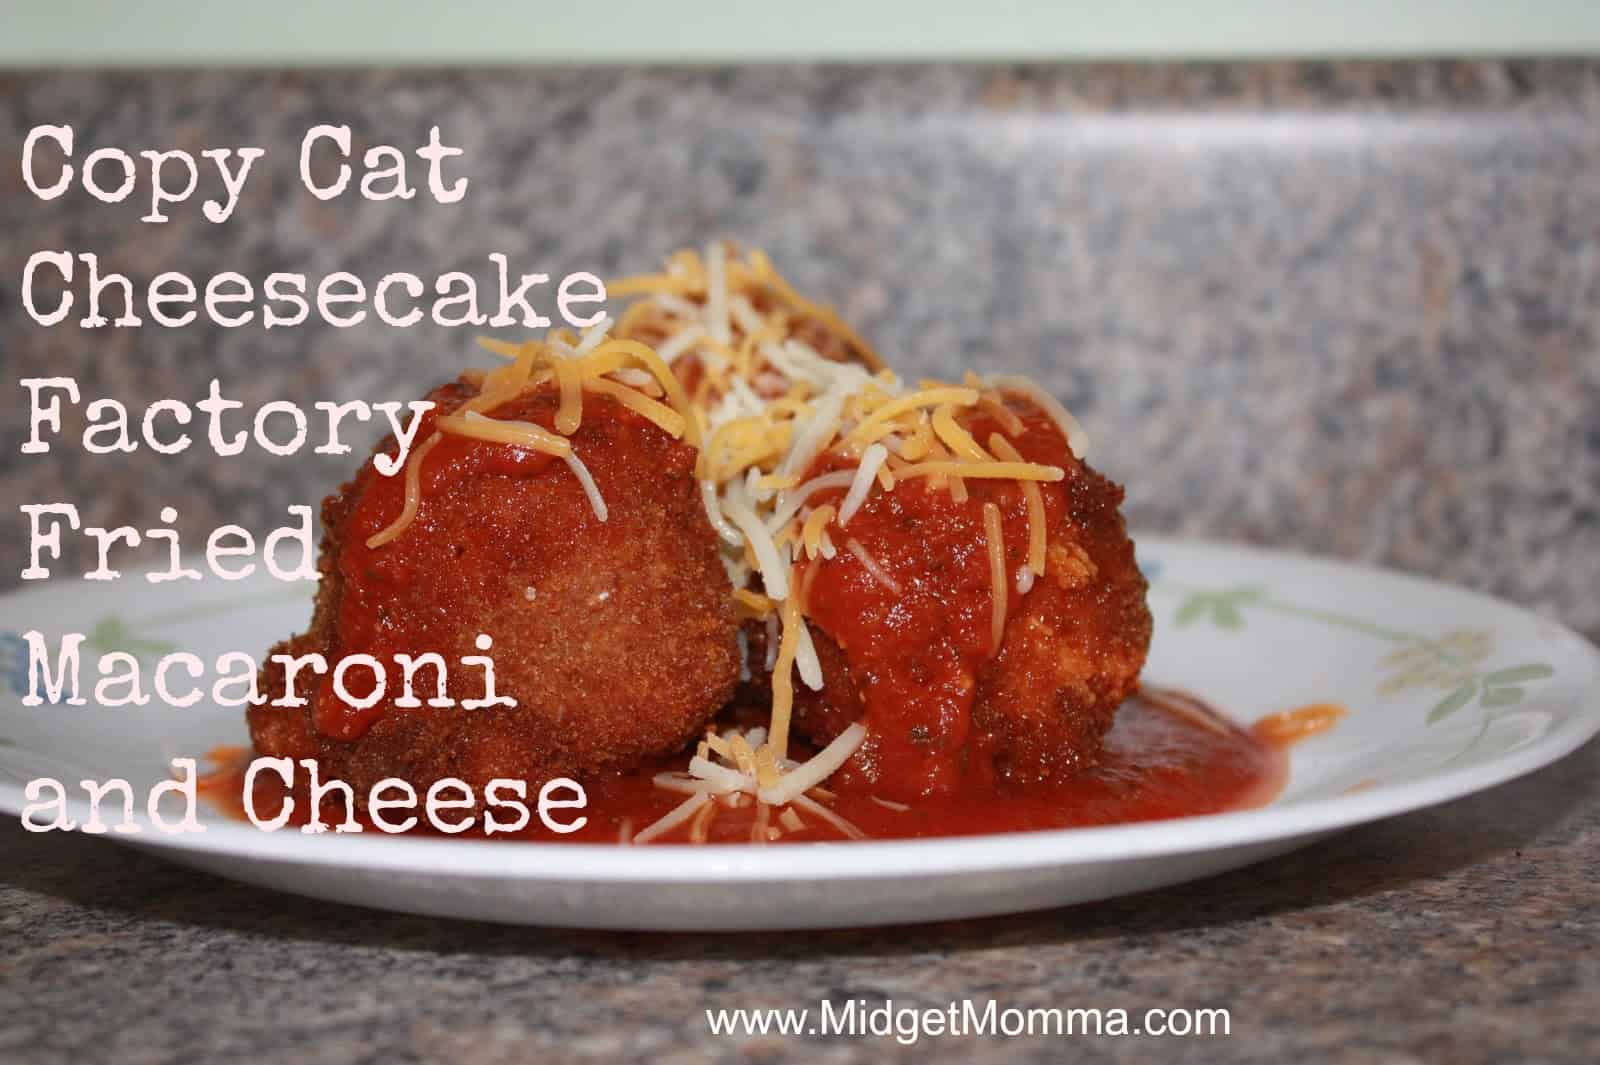 Copy Cat Cheesecake Factory Fried Macaroni and Cheese